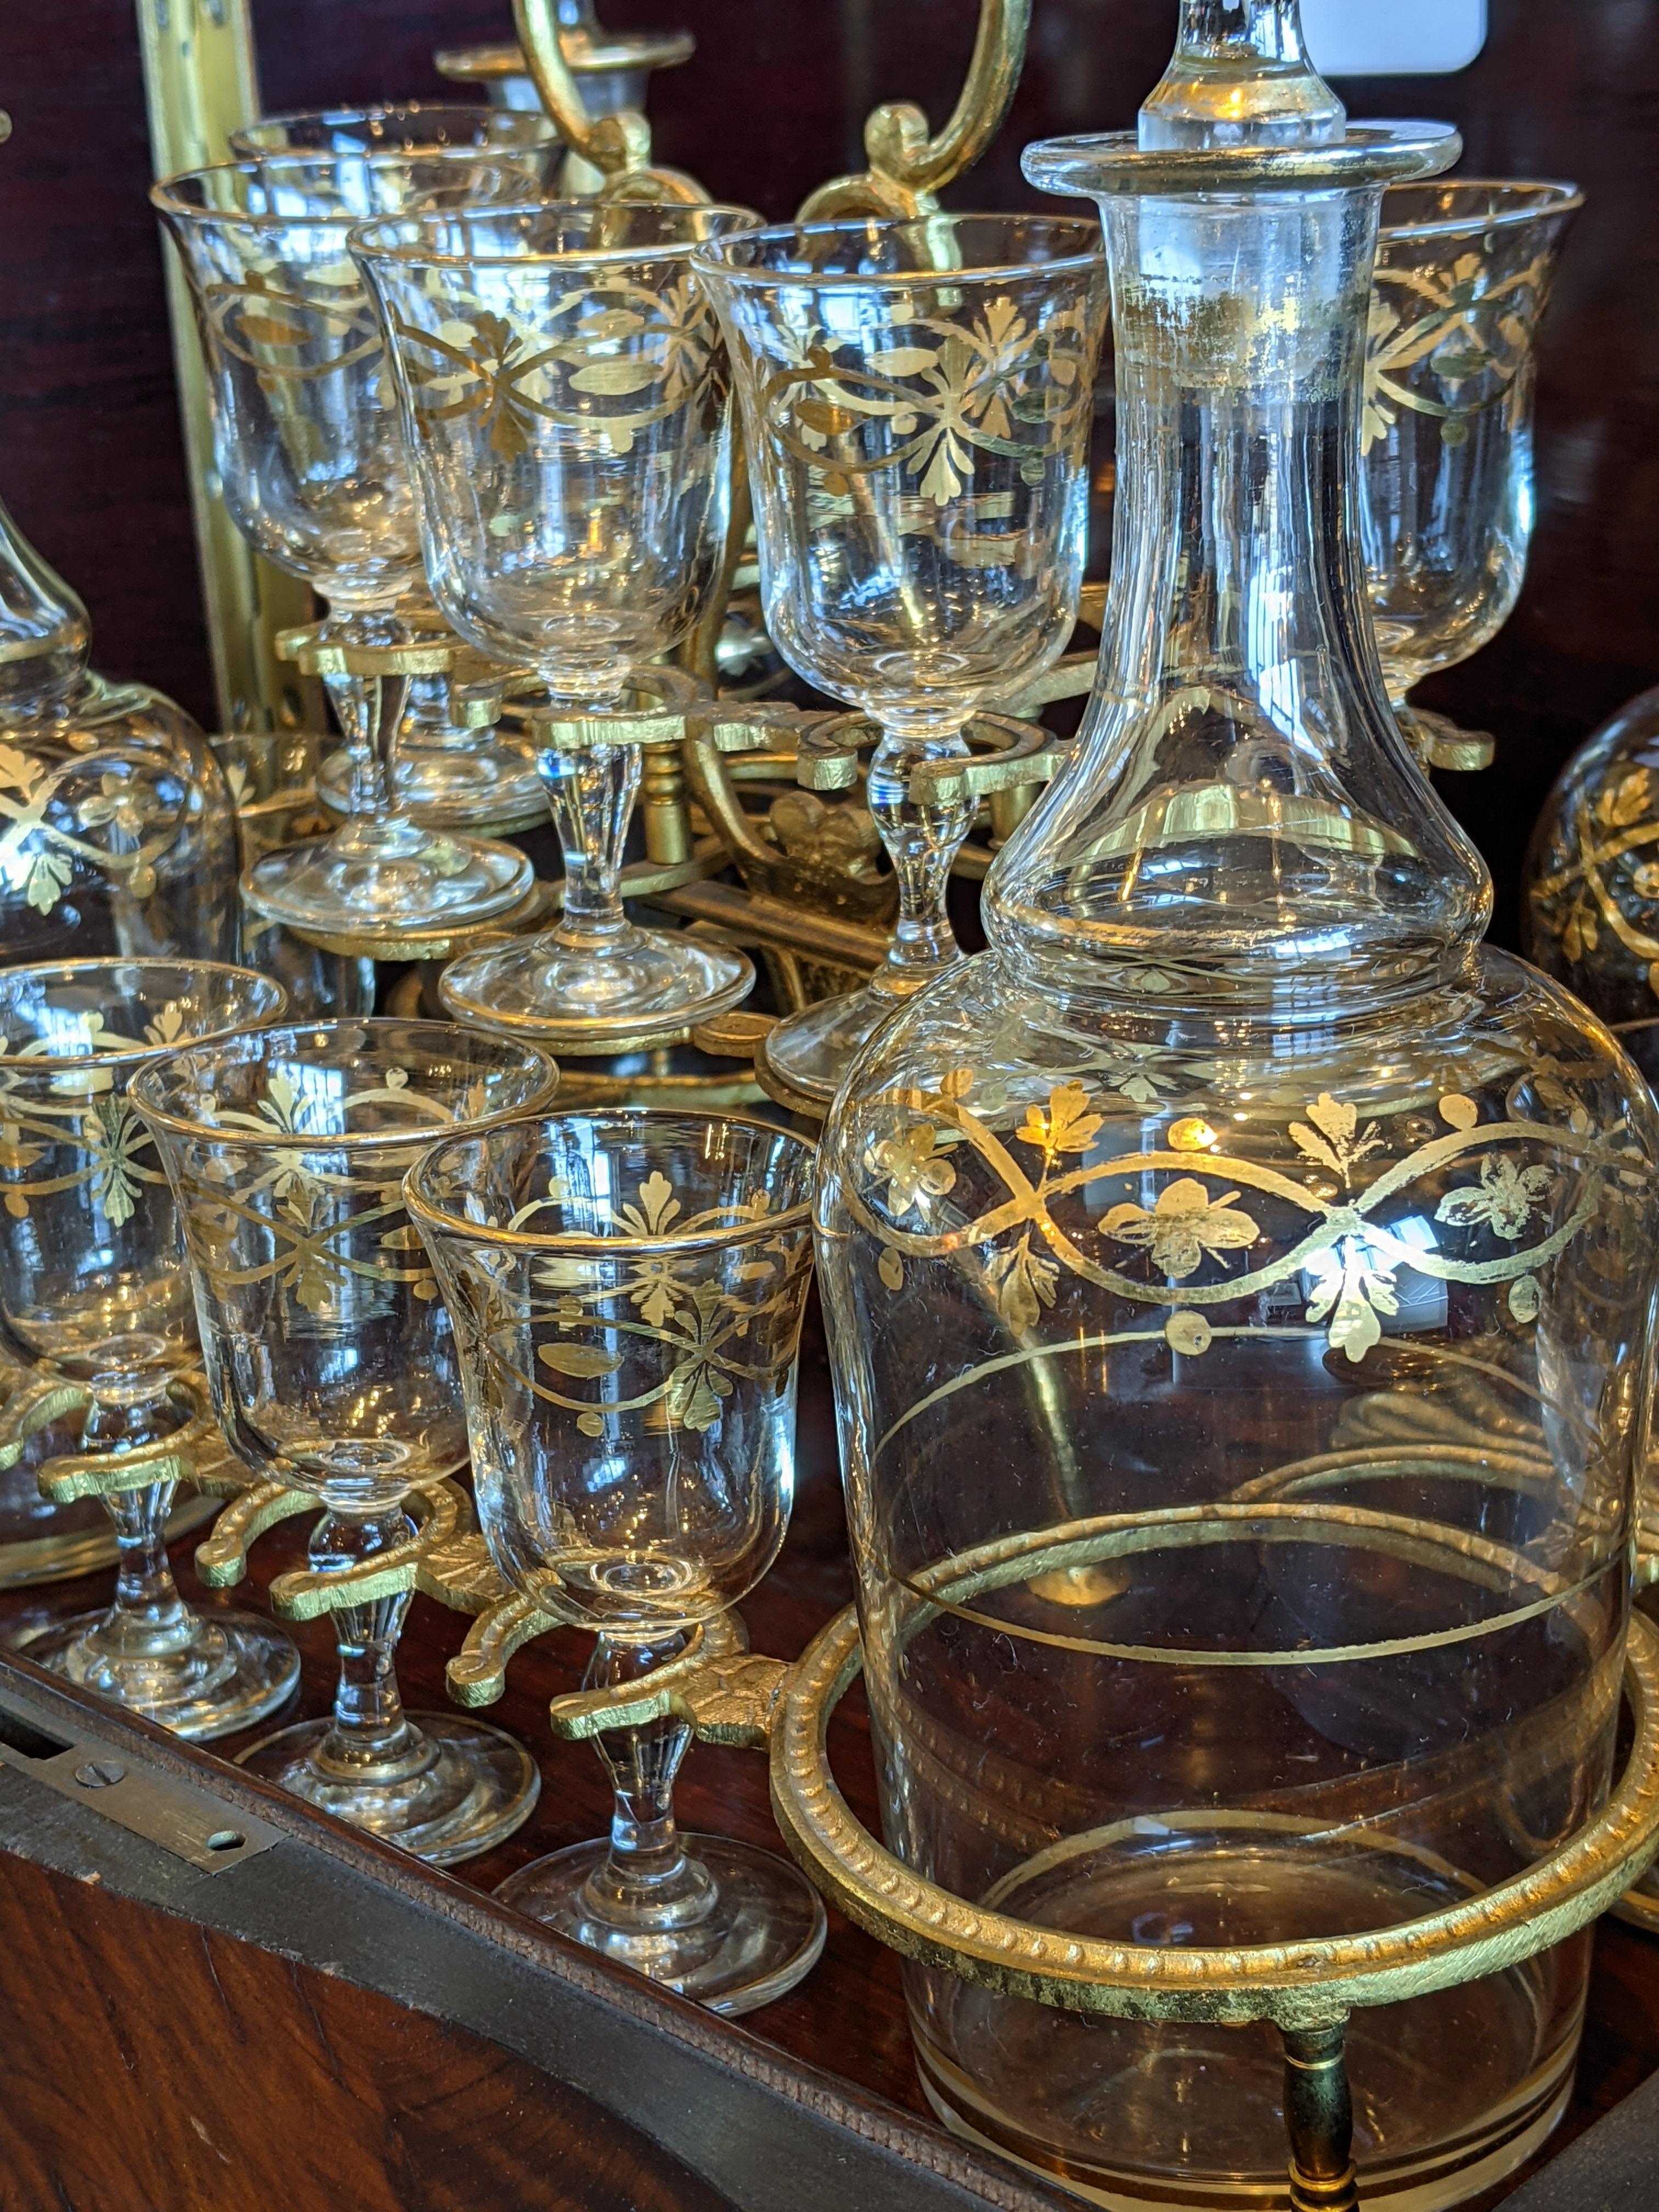 Napoleonic Tantalo liqueur cabinet, mid-19th century, in elm briar, brass and crystal glasses/bottles with gold filaments.
Six shot glasses missing.